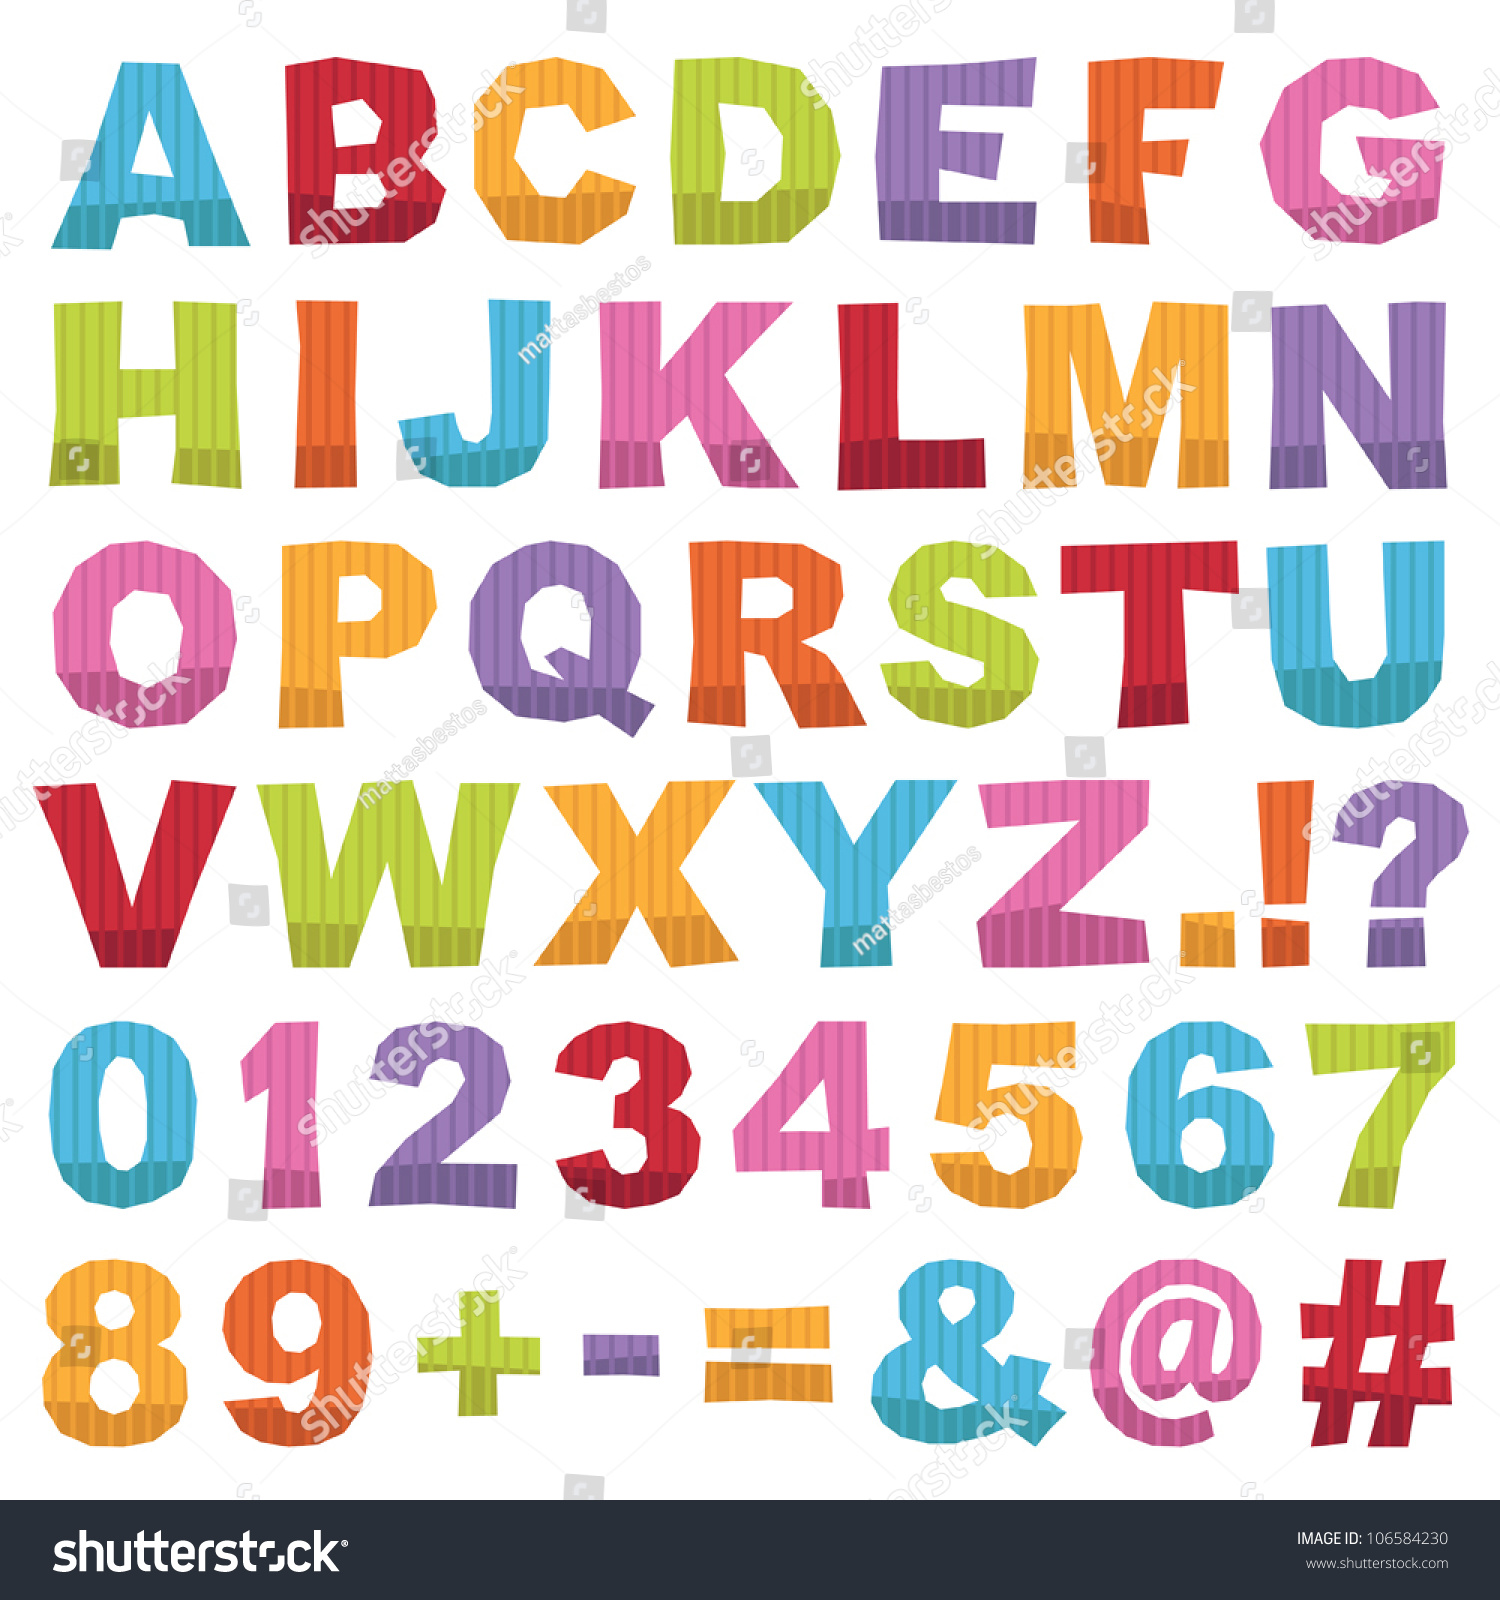 Cut Out Alphabet Shapes With Letters, Numbers And Punctuation, Isolated ...